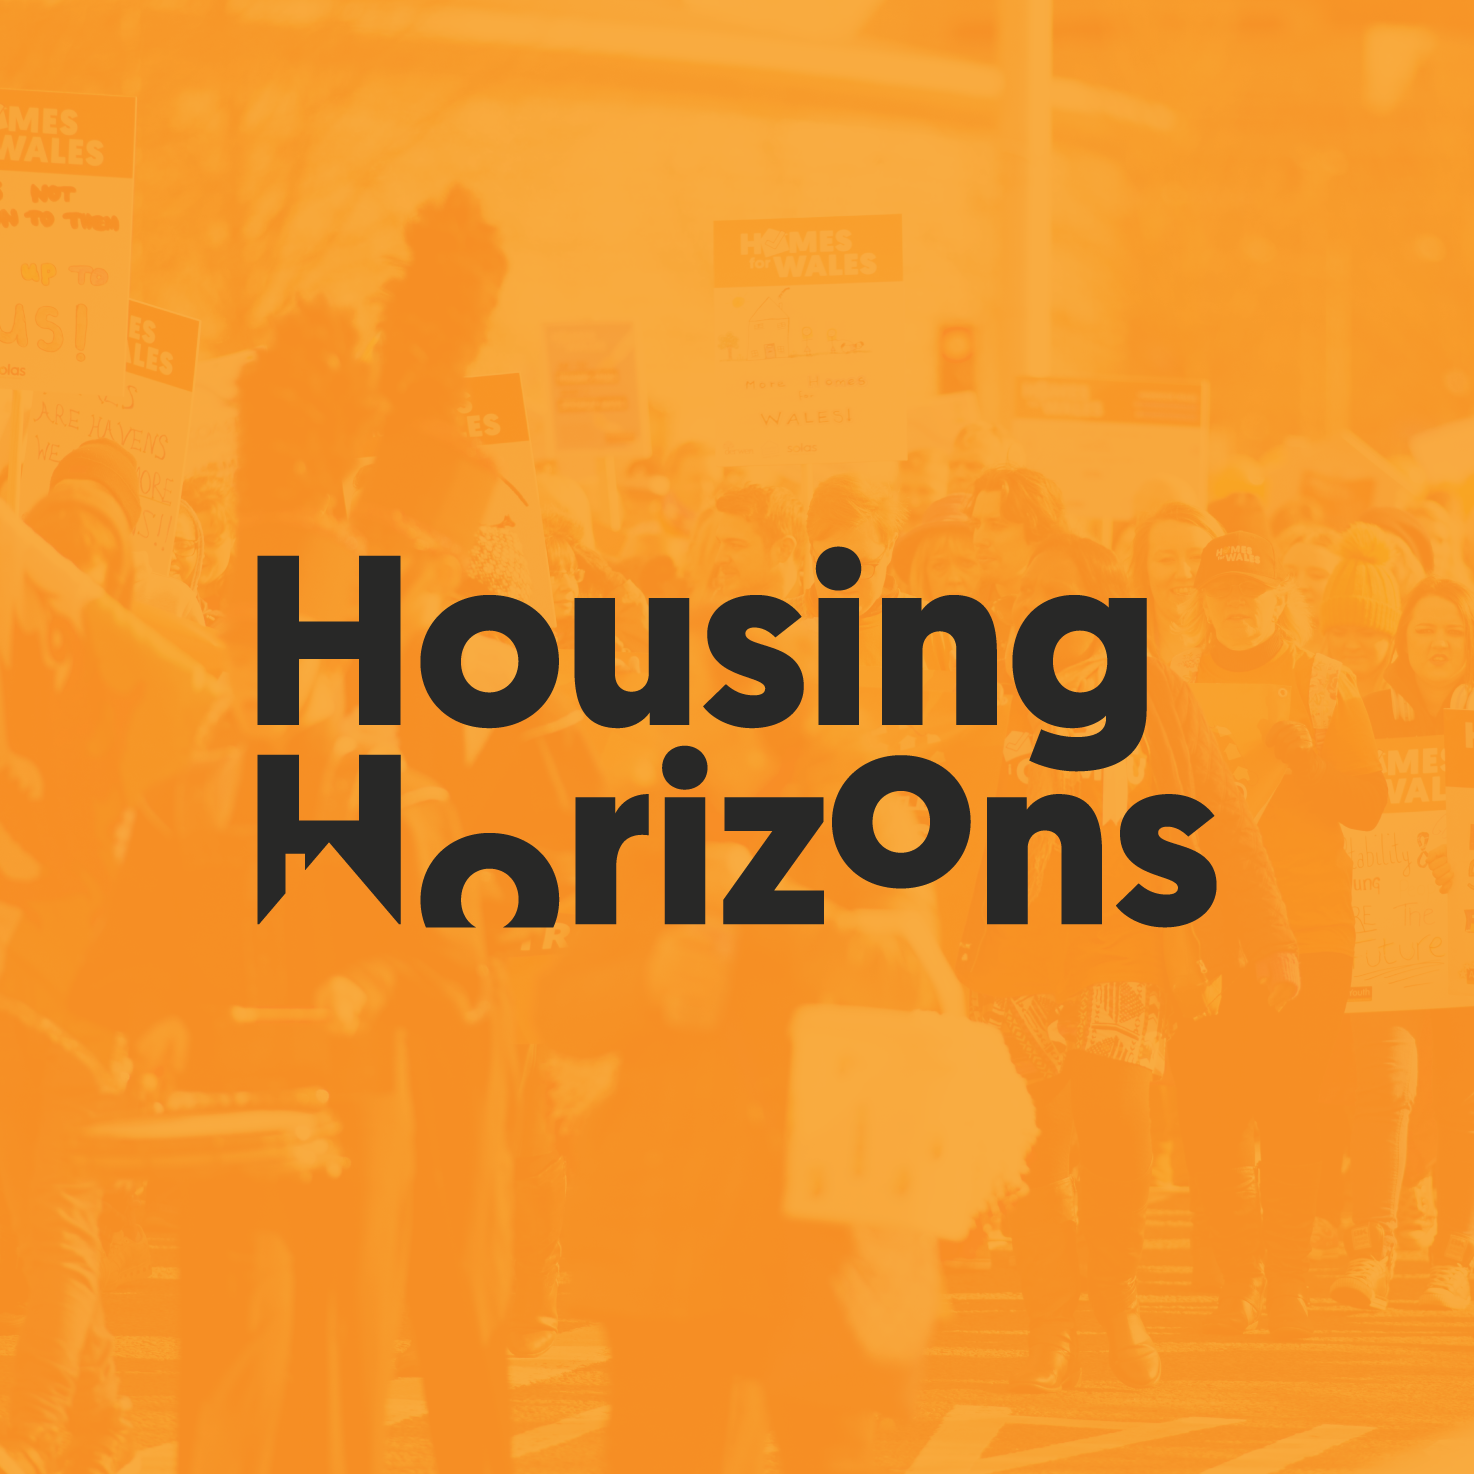 Picture of the Housing Horizons logo